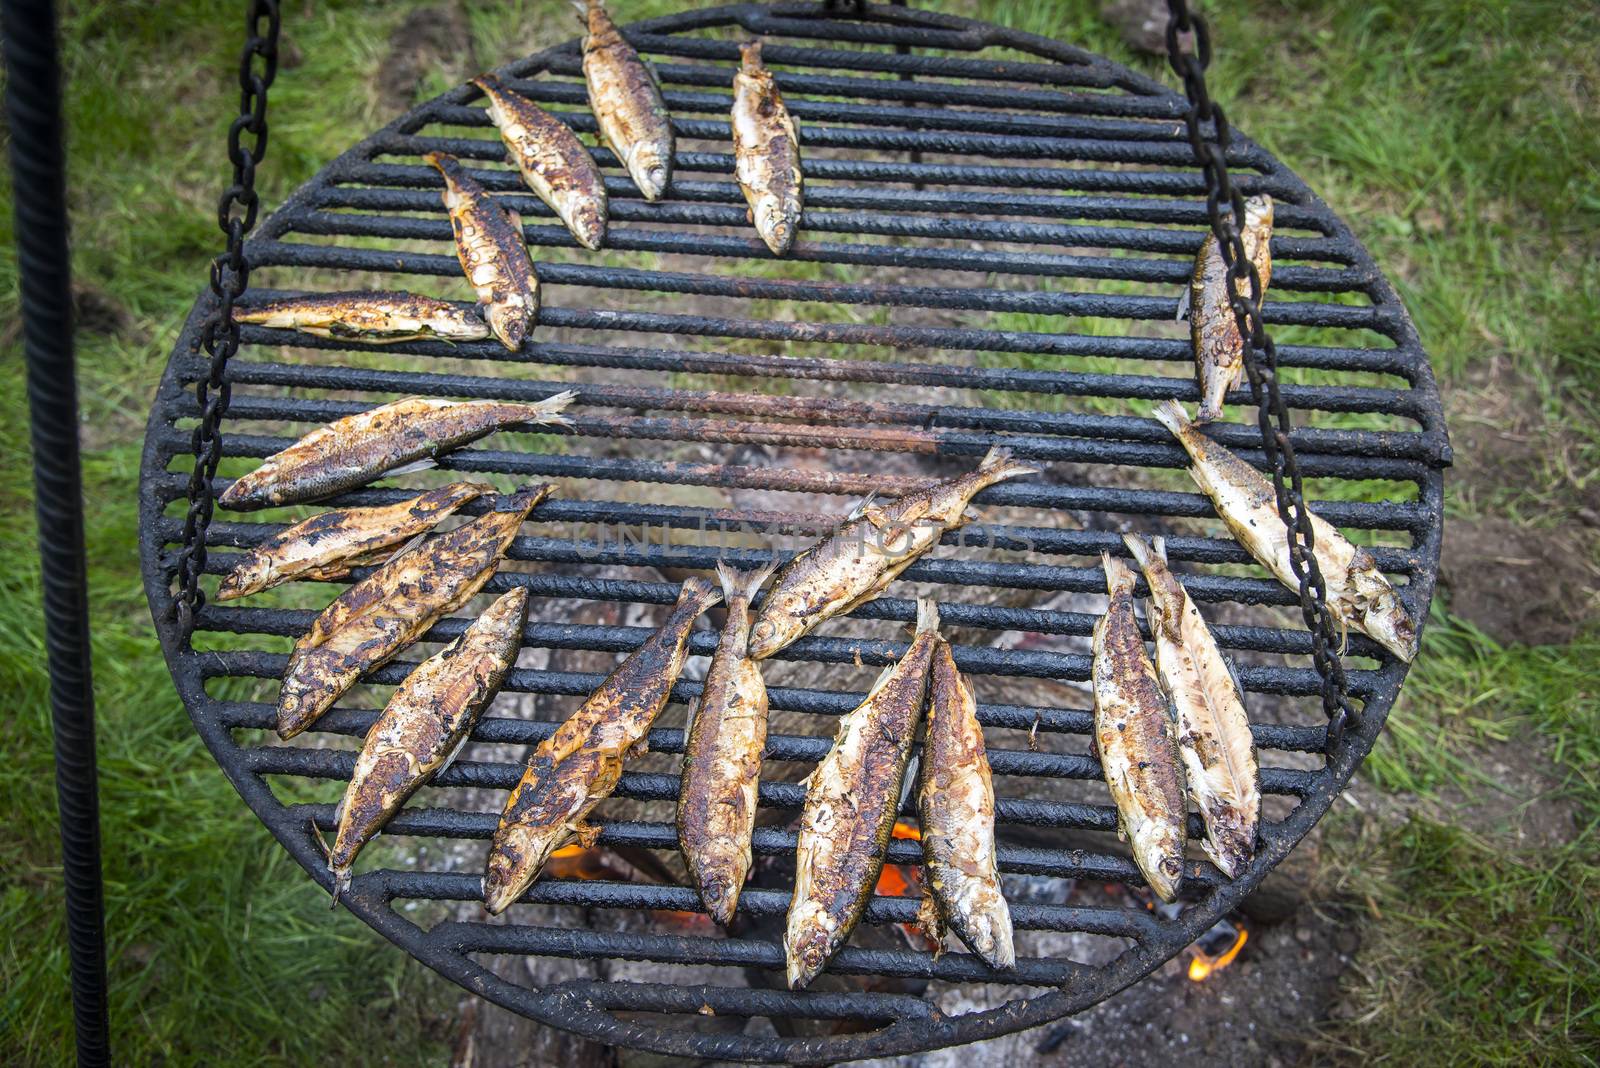 whitefish during frying on fire